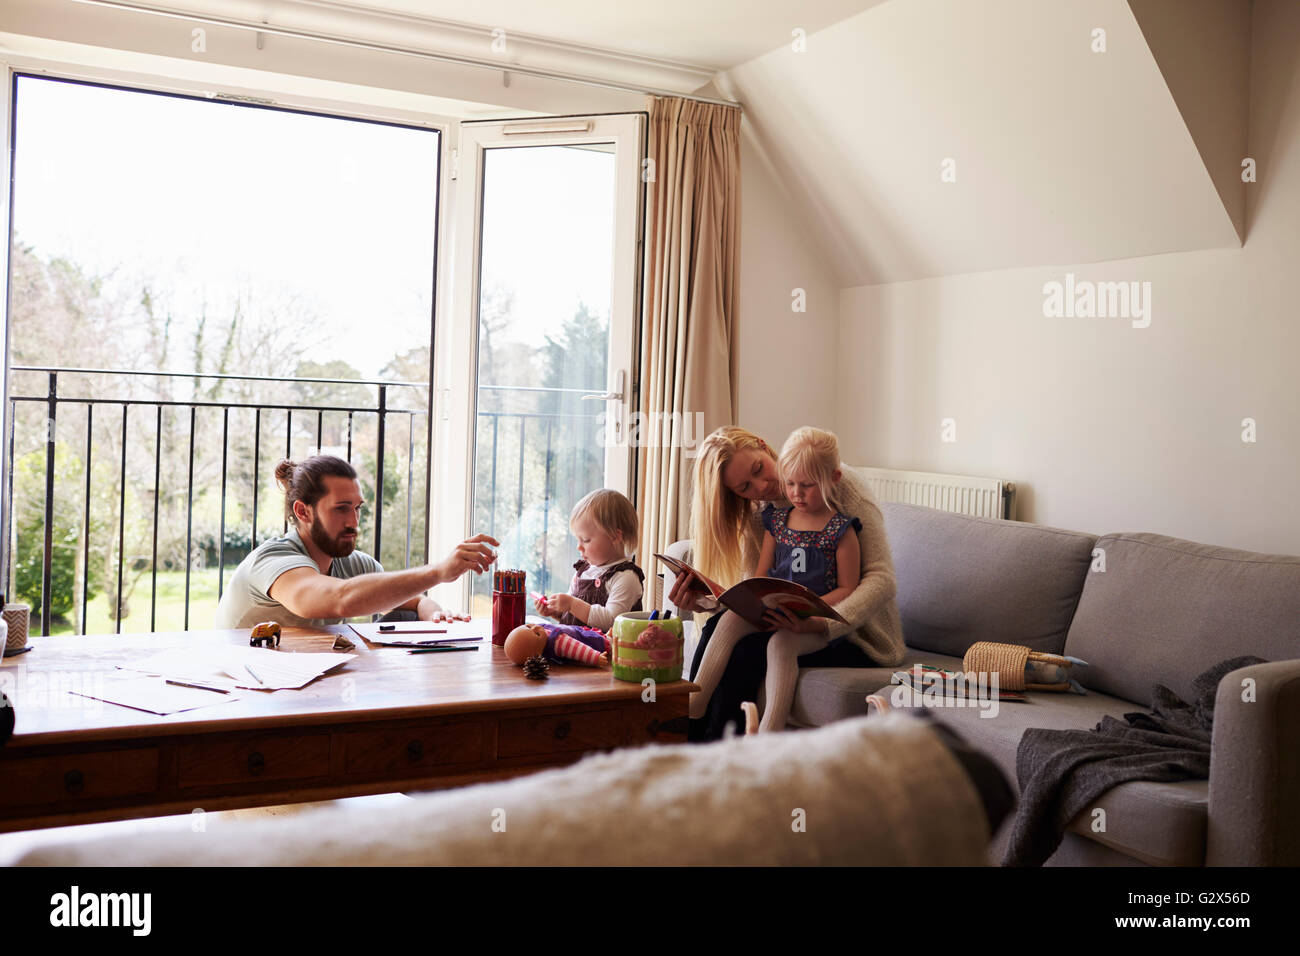 Family Drawing Pictures And Reading At Home Together Stock Photo